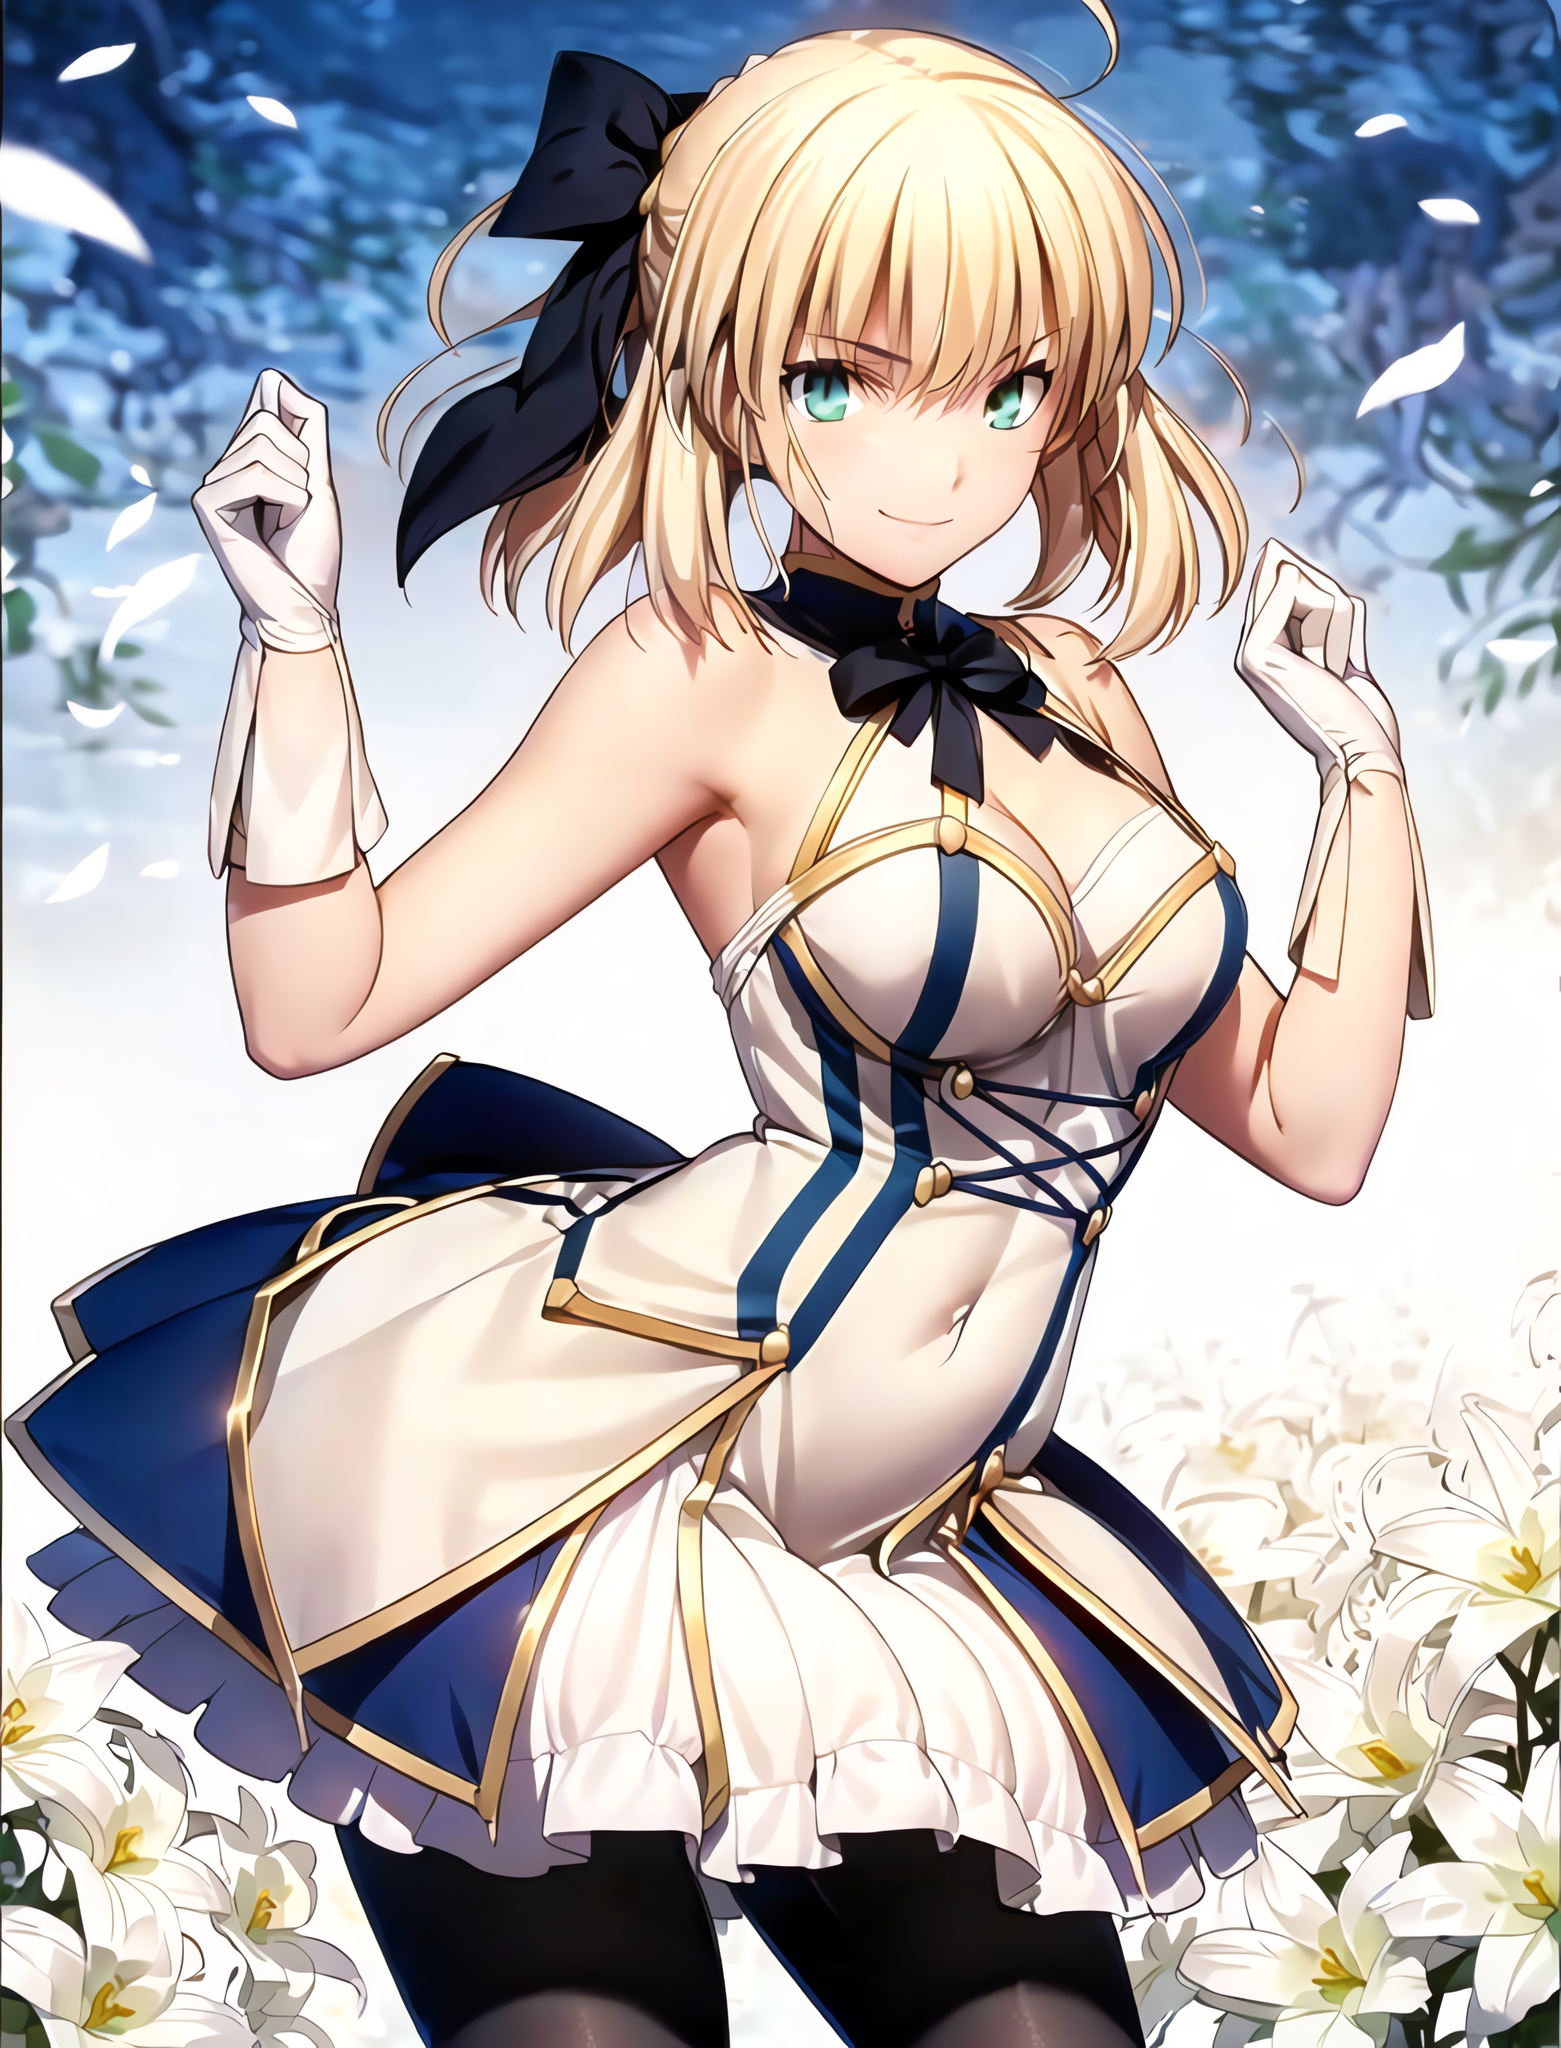 Anime 1561x2048 AI art anime anime girls Fate series Fate/Unlimited Codes  Fate/Grand Order Artoria Pendragon Saber Lily ponytail ahoge blonde solo artwork digital art fan art smiling gloves looking at viewer portrait display flowers petals short hair bow tie